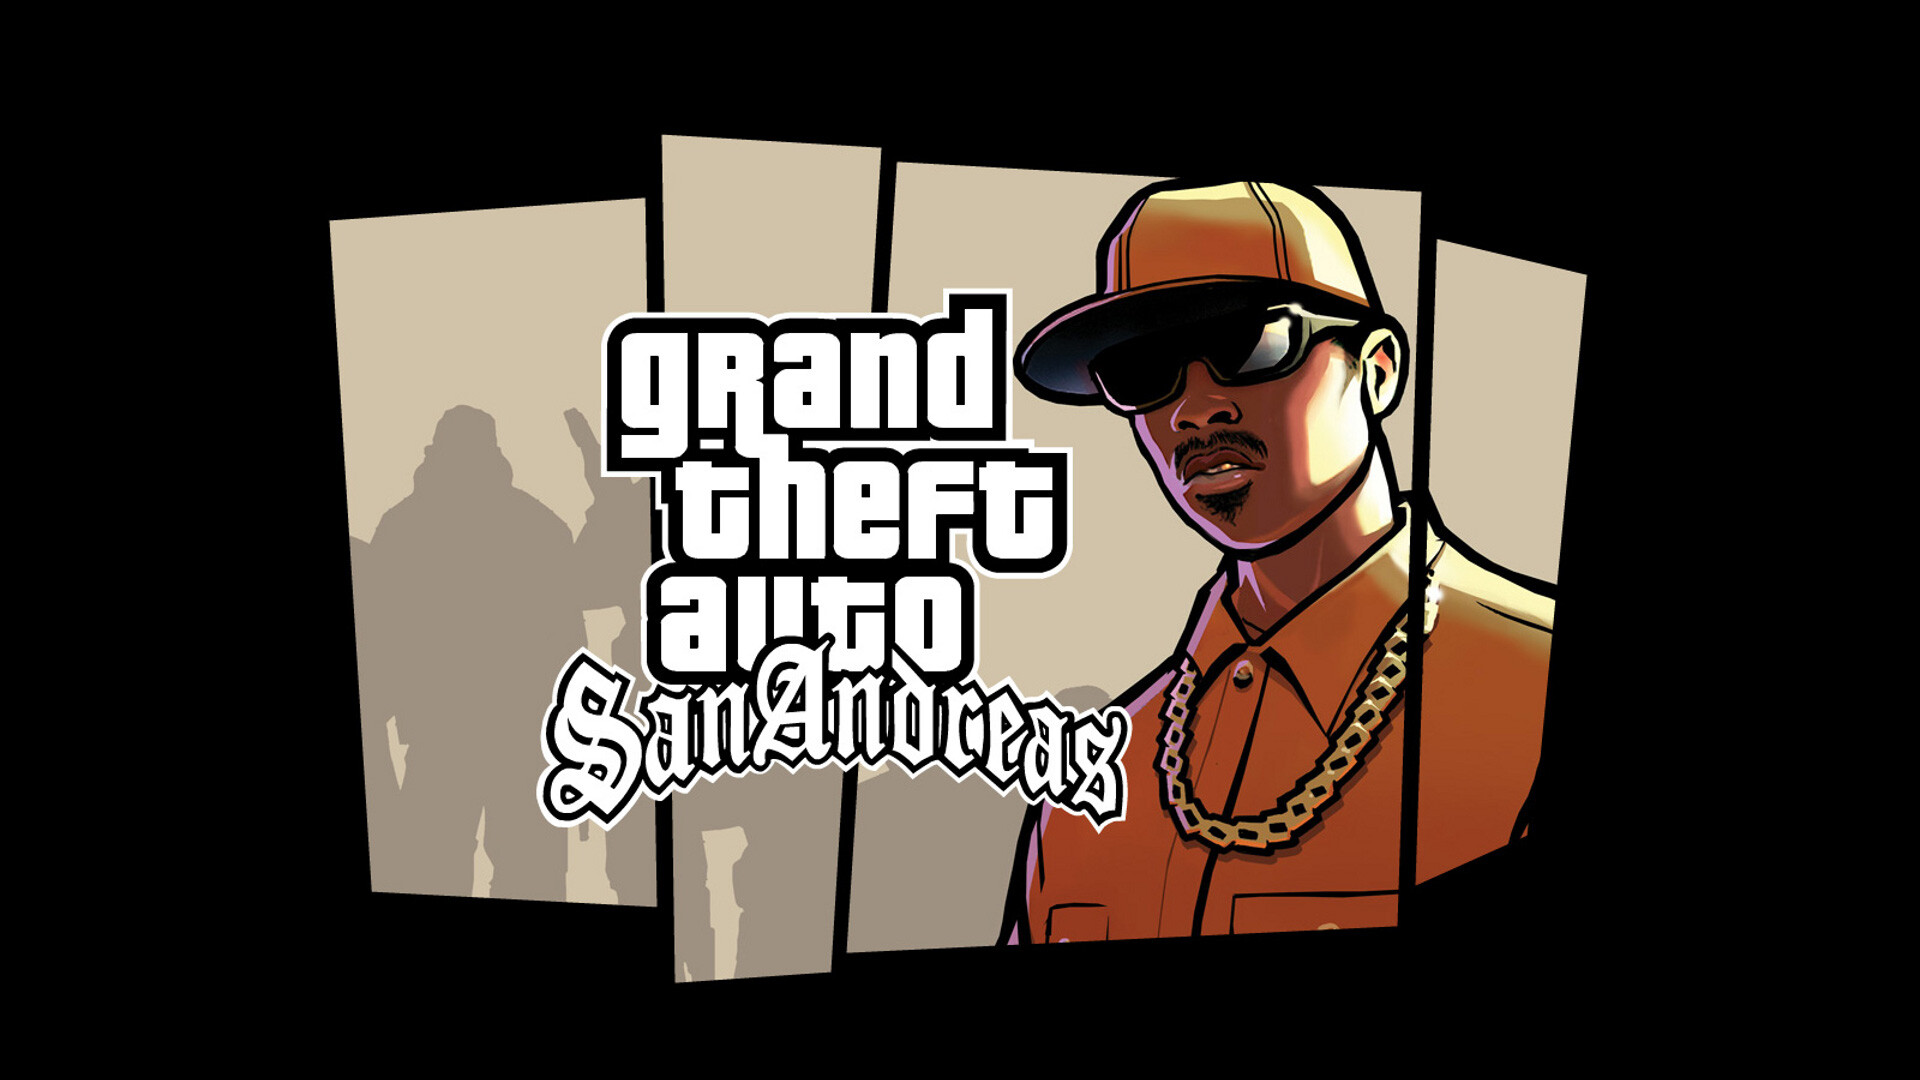 Grand Theft Auto: San Andreas: Played in an open-world environment, CJ following the story, looking for clues and meeting contacts. 1920x1080 Full HD Background.